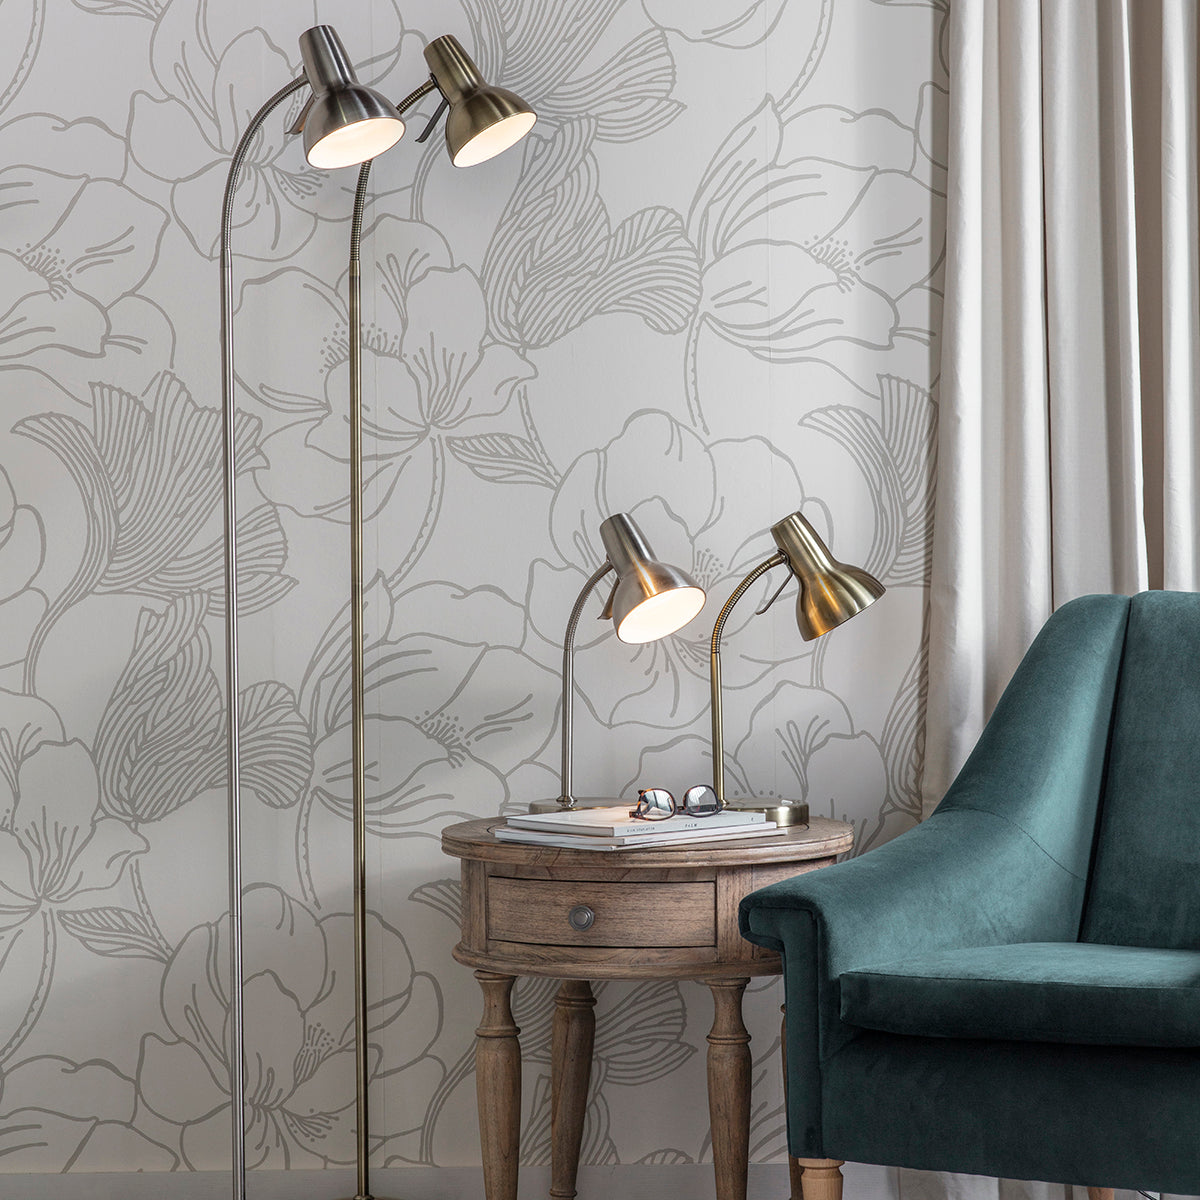 A Bickerton Floor Lamp Antique Brass by Kikiathome.co.uk enhances the interior decor with a chair in front of a floral wallpaper.